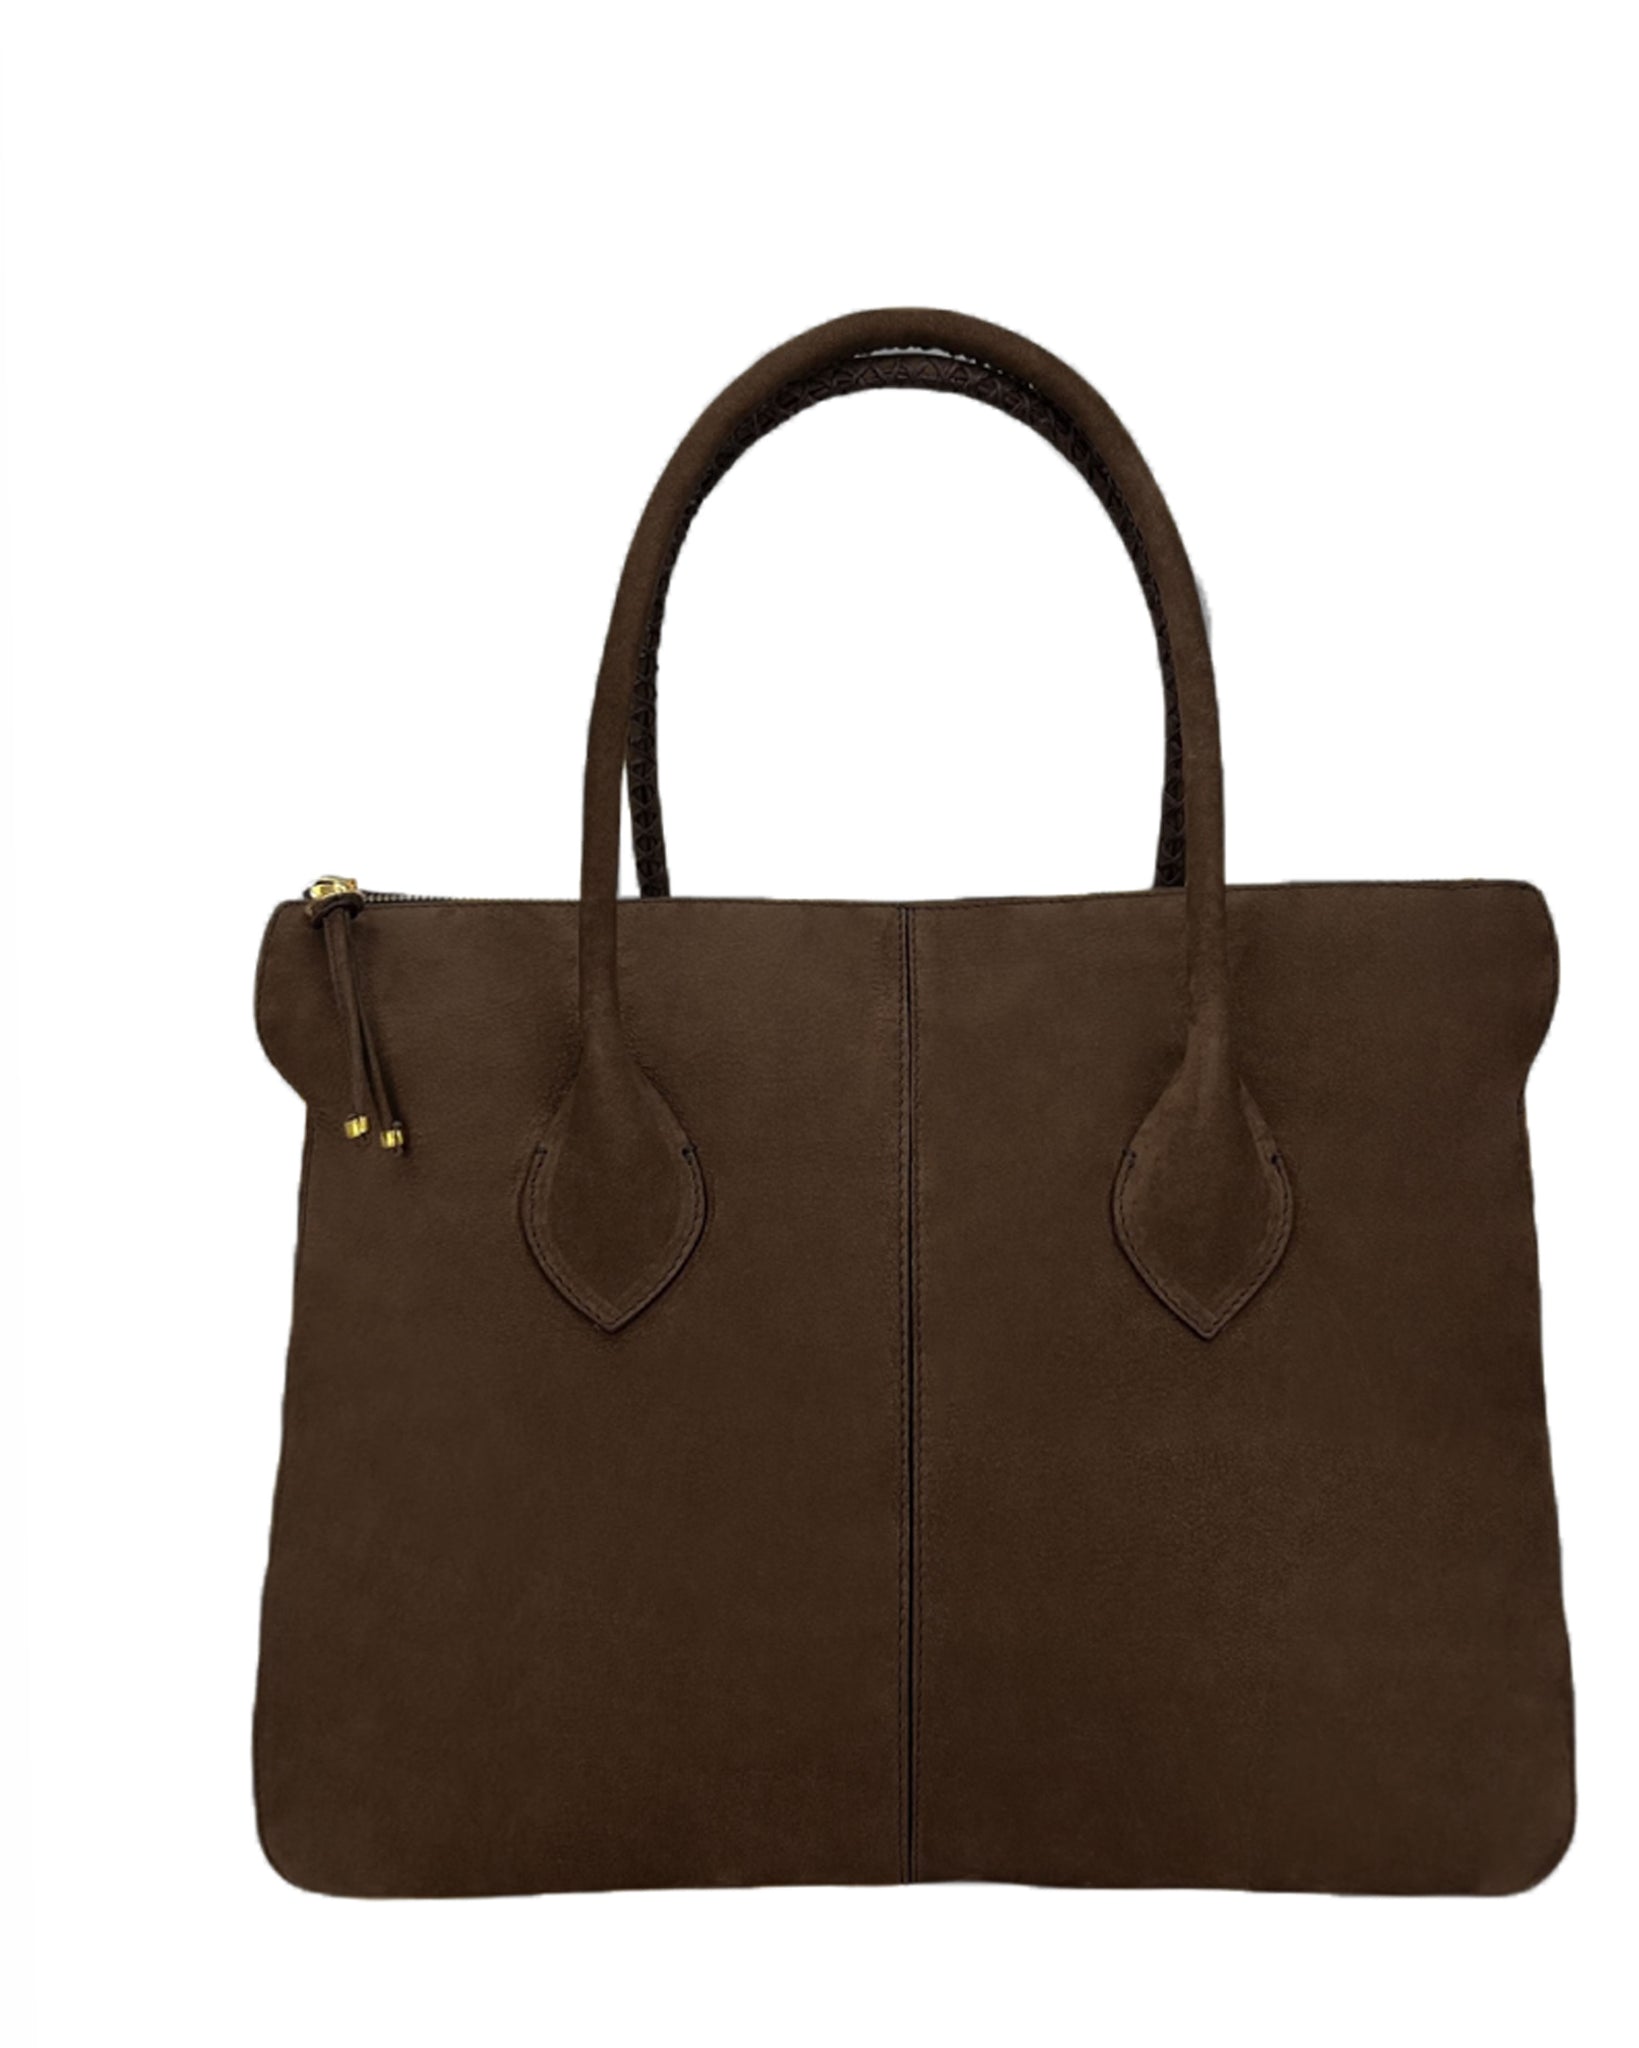 Lupe Sino II Tote Bag in Umber Suede